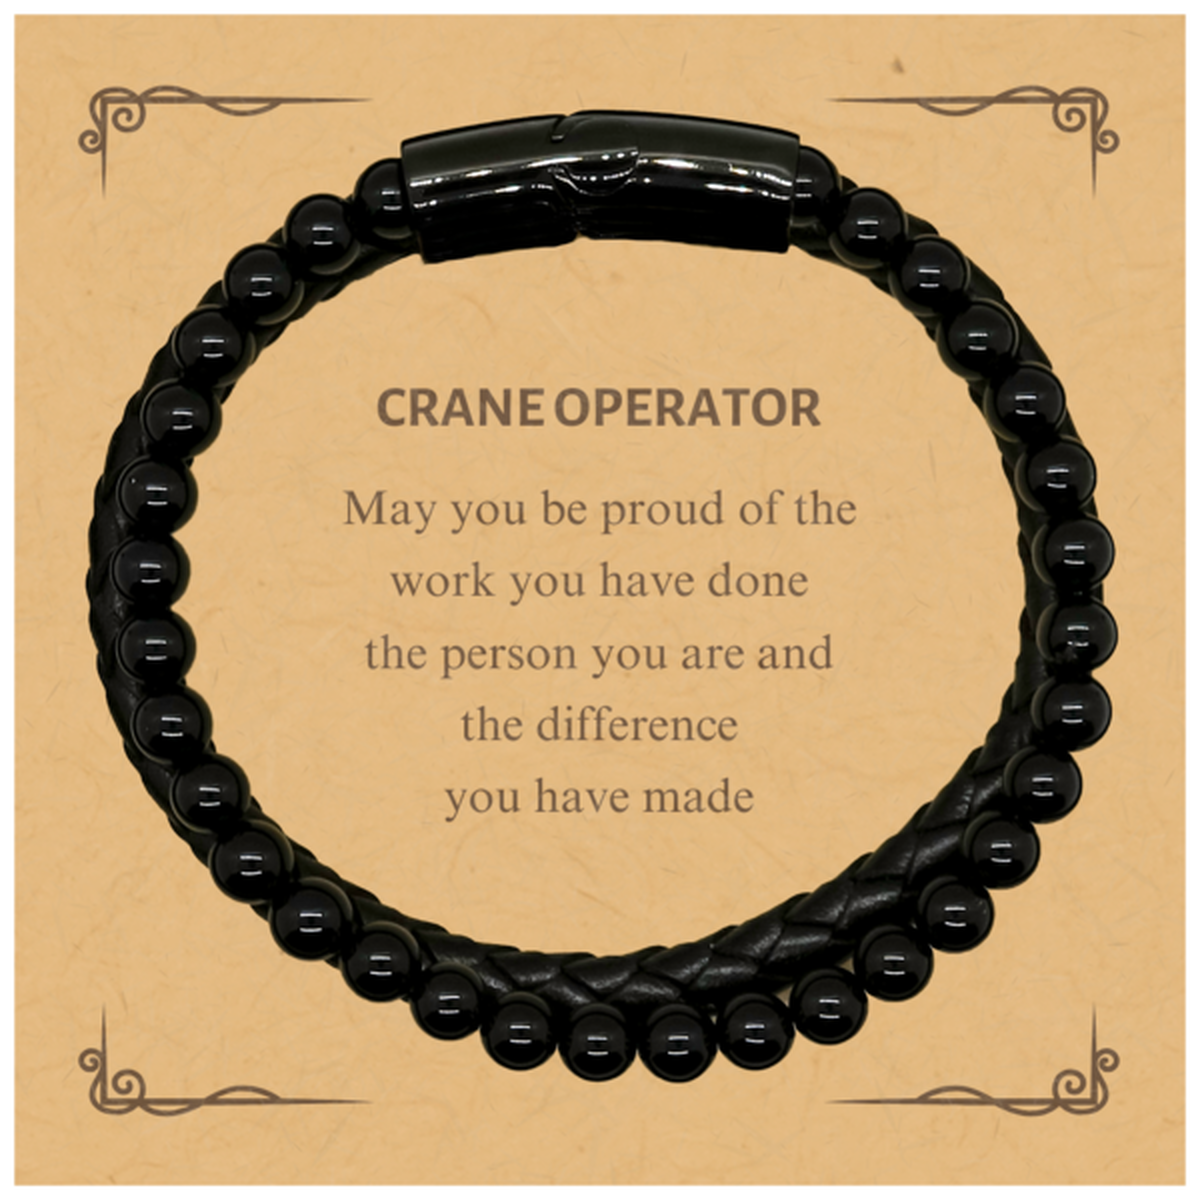 Crane Operator May you be proud of the work you have done, Retirement Crane Operator Stone Leather Bracelets for Colleague Appreciation Gifts Amazing for Crane Operator